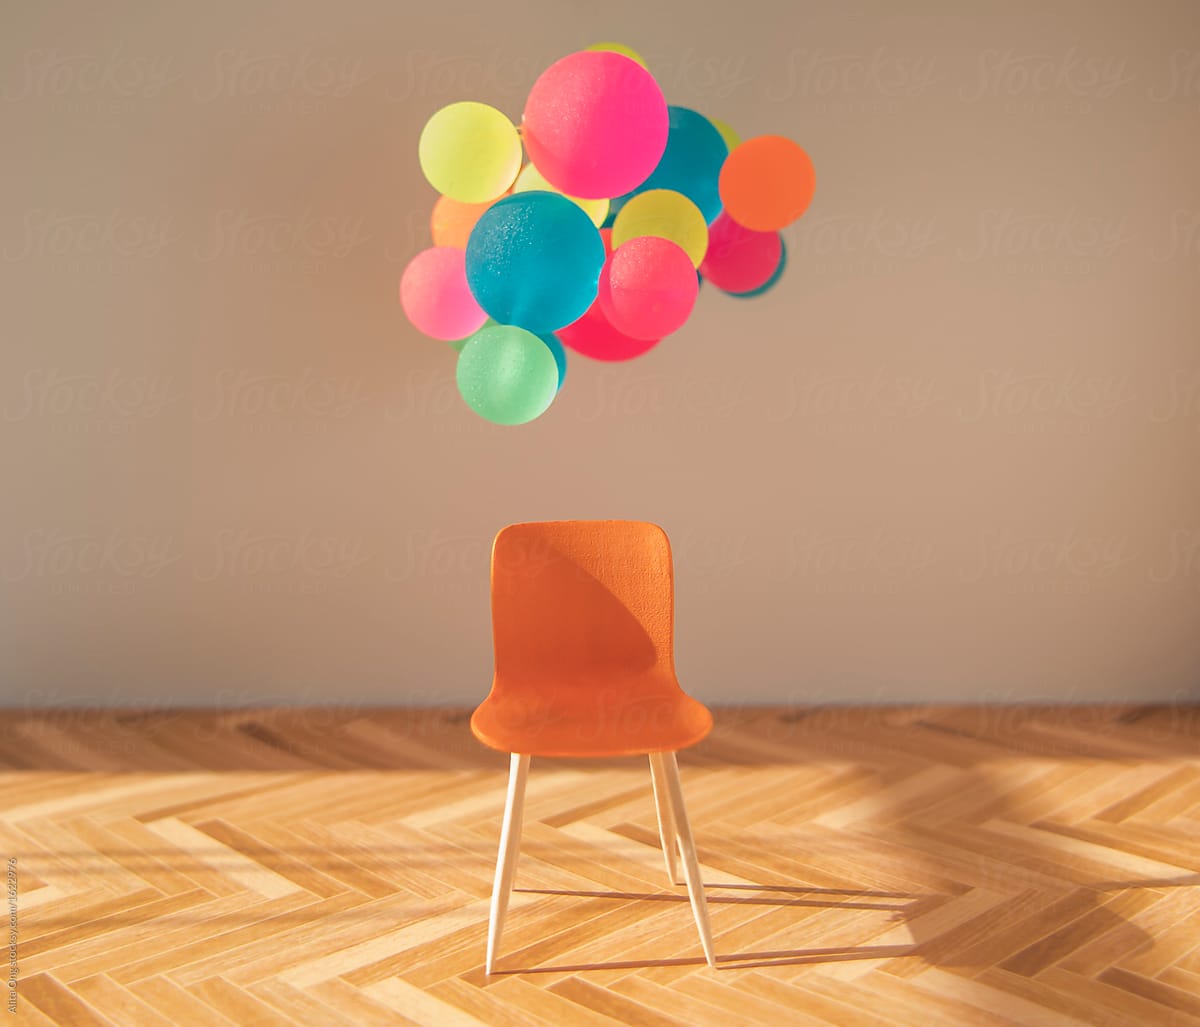 Floating objects above a single chair